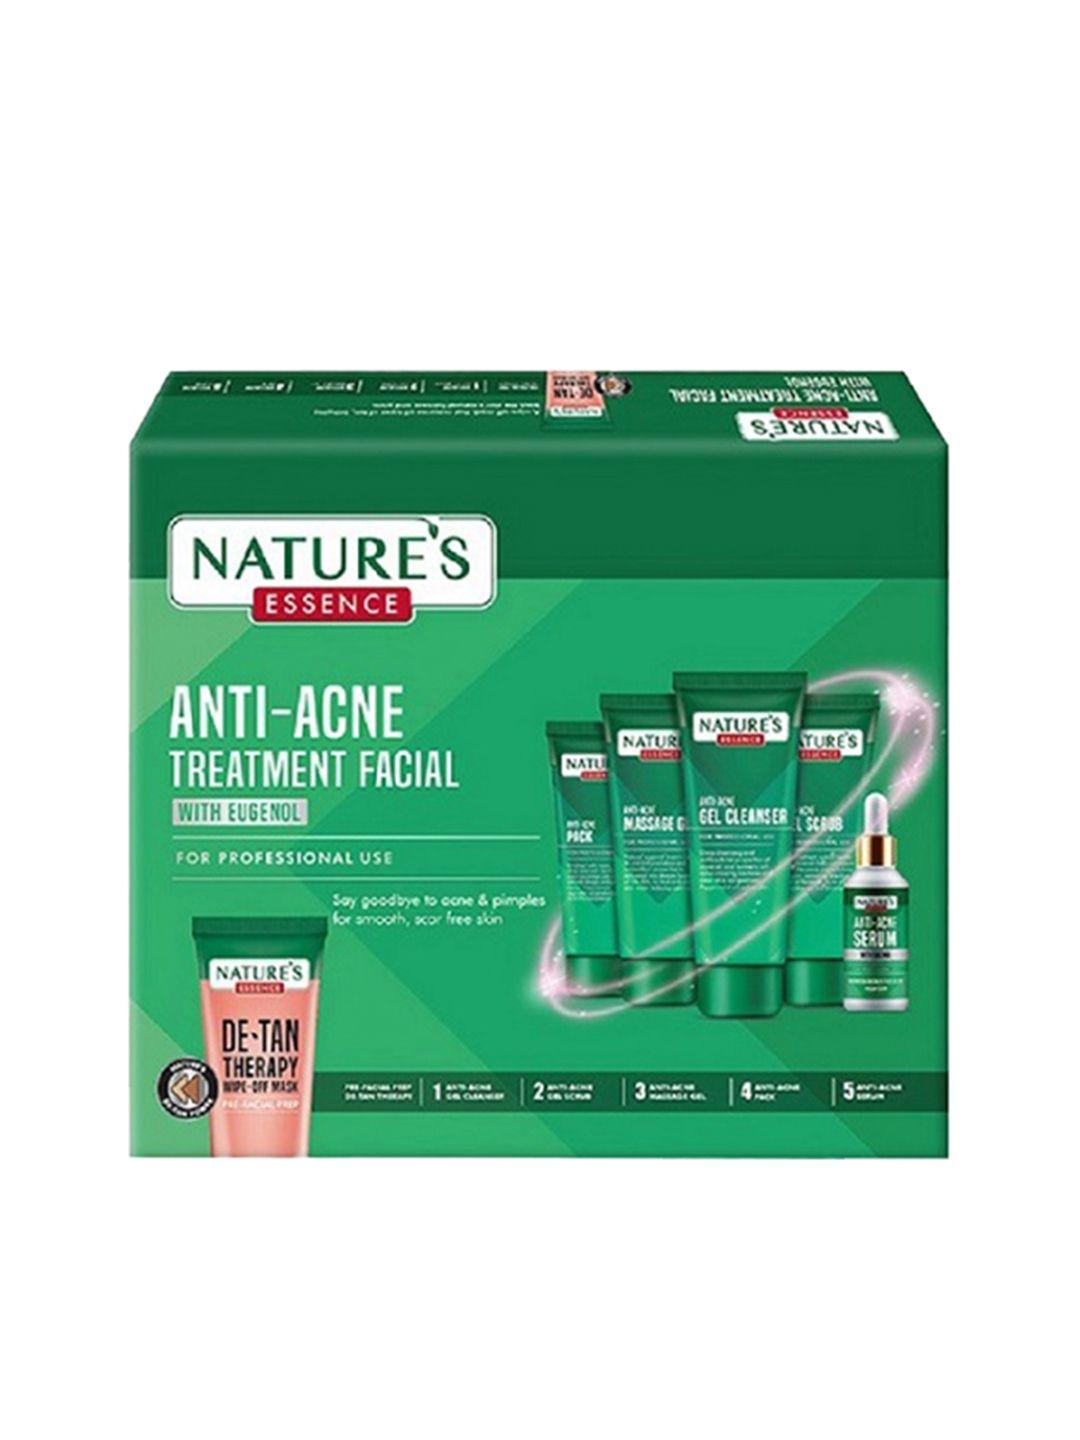 natures essence anti-acne treatment facial kit with eugenol & neem